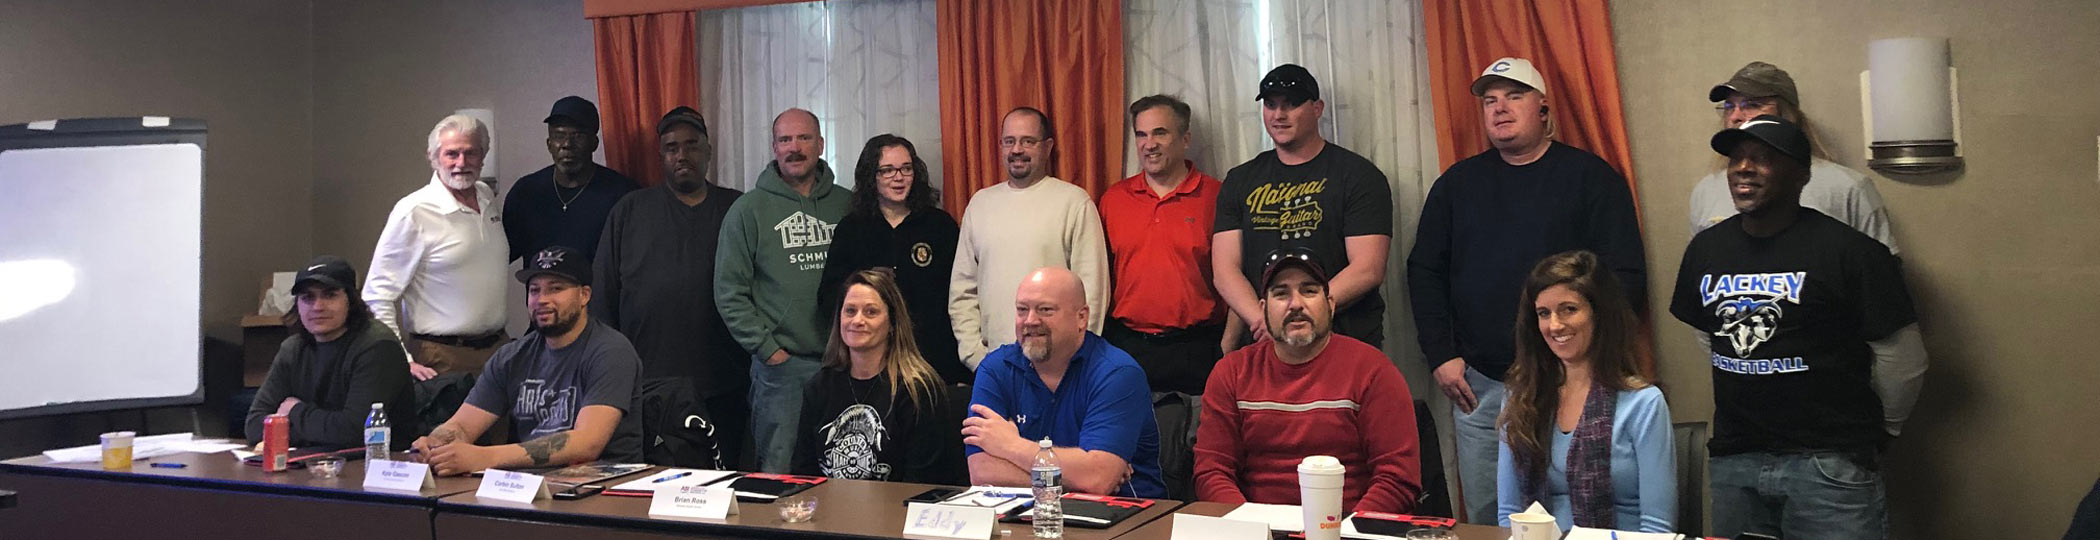 Annapolic MD stormwater training class 2019